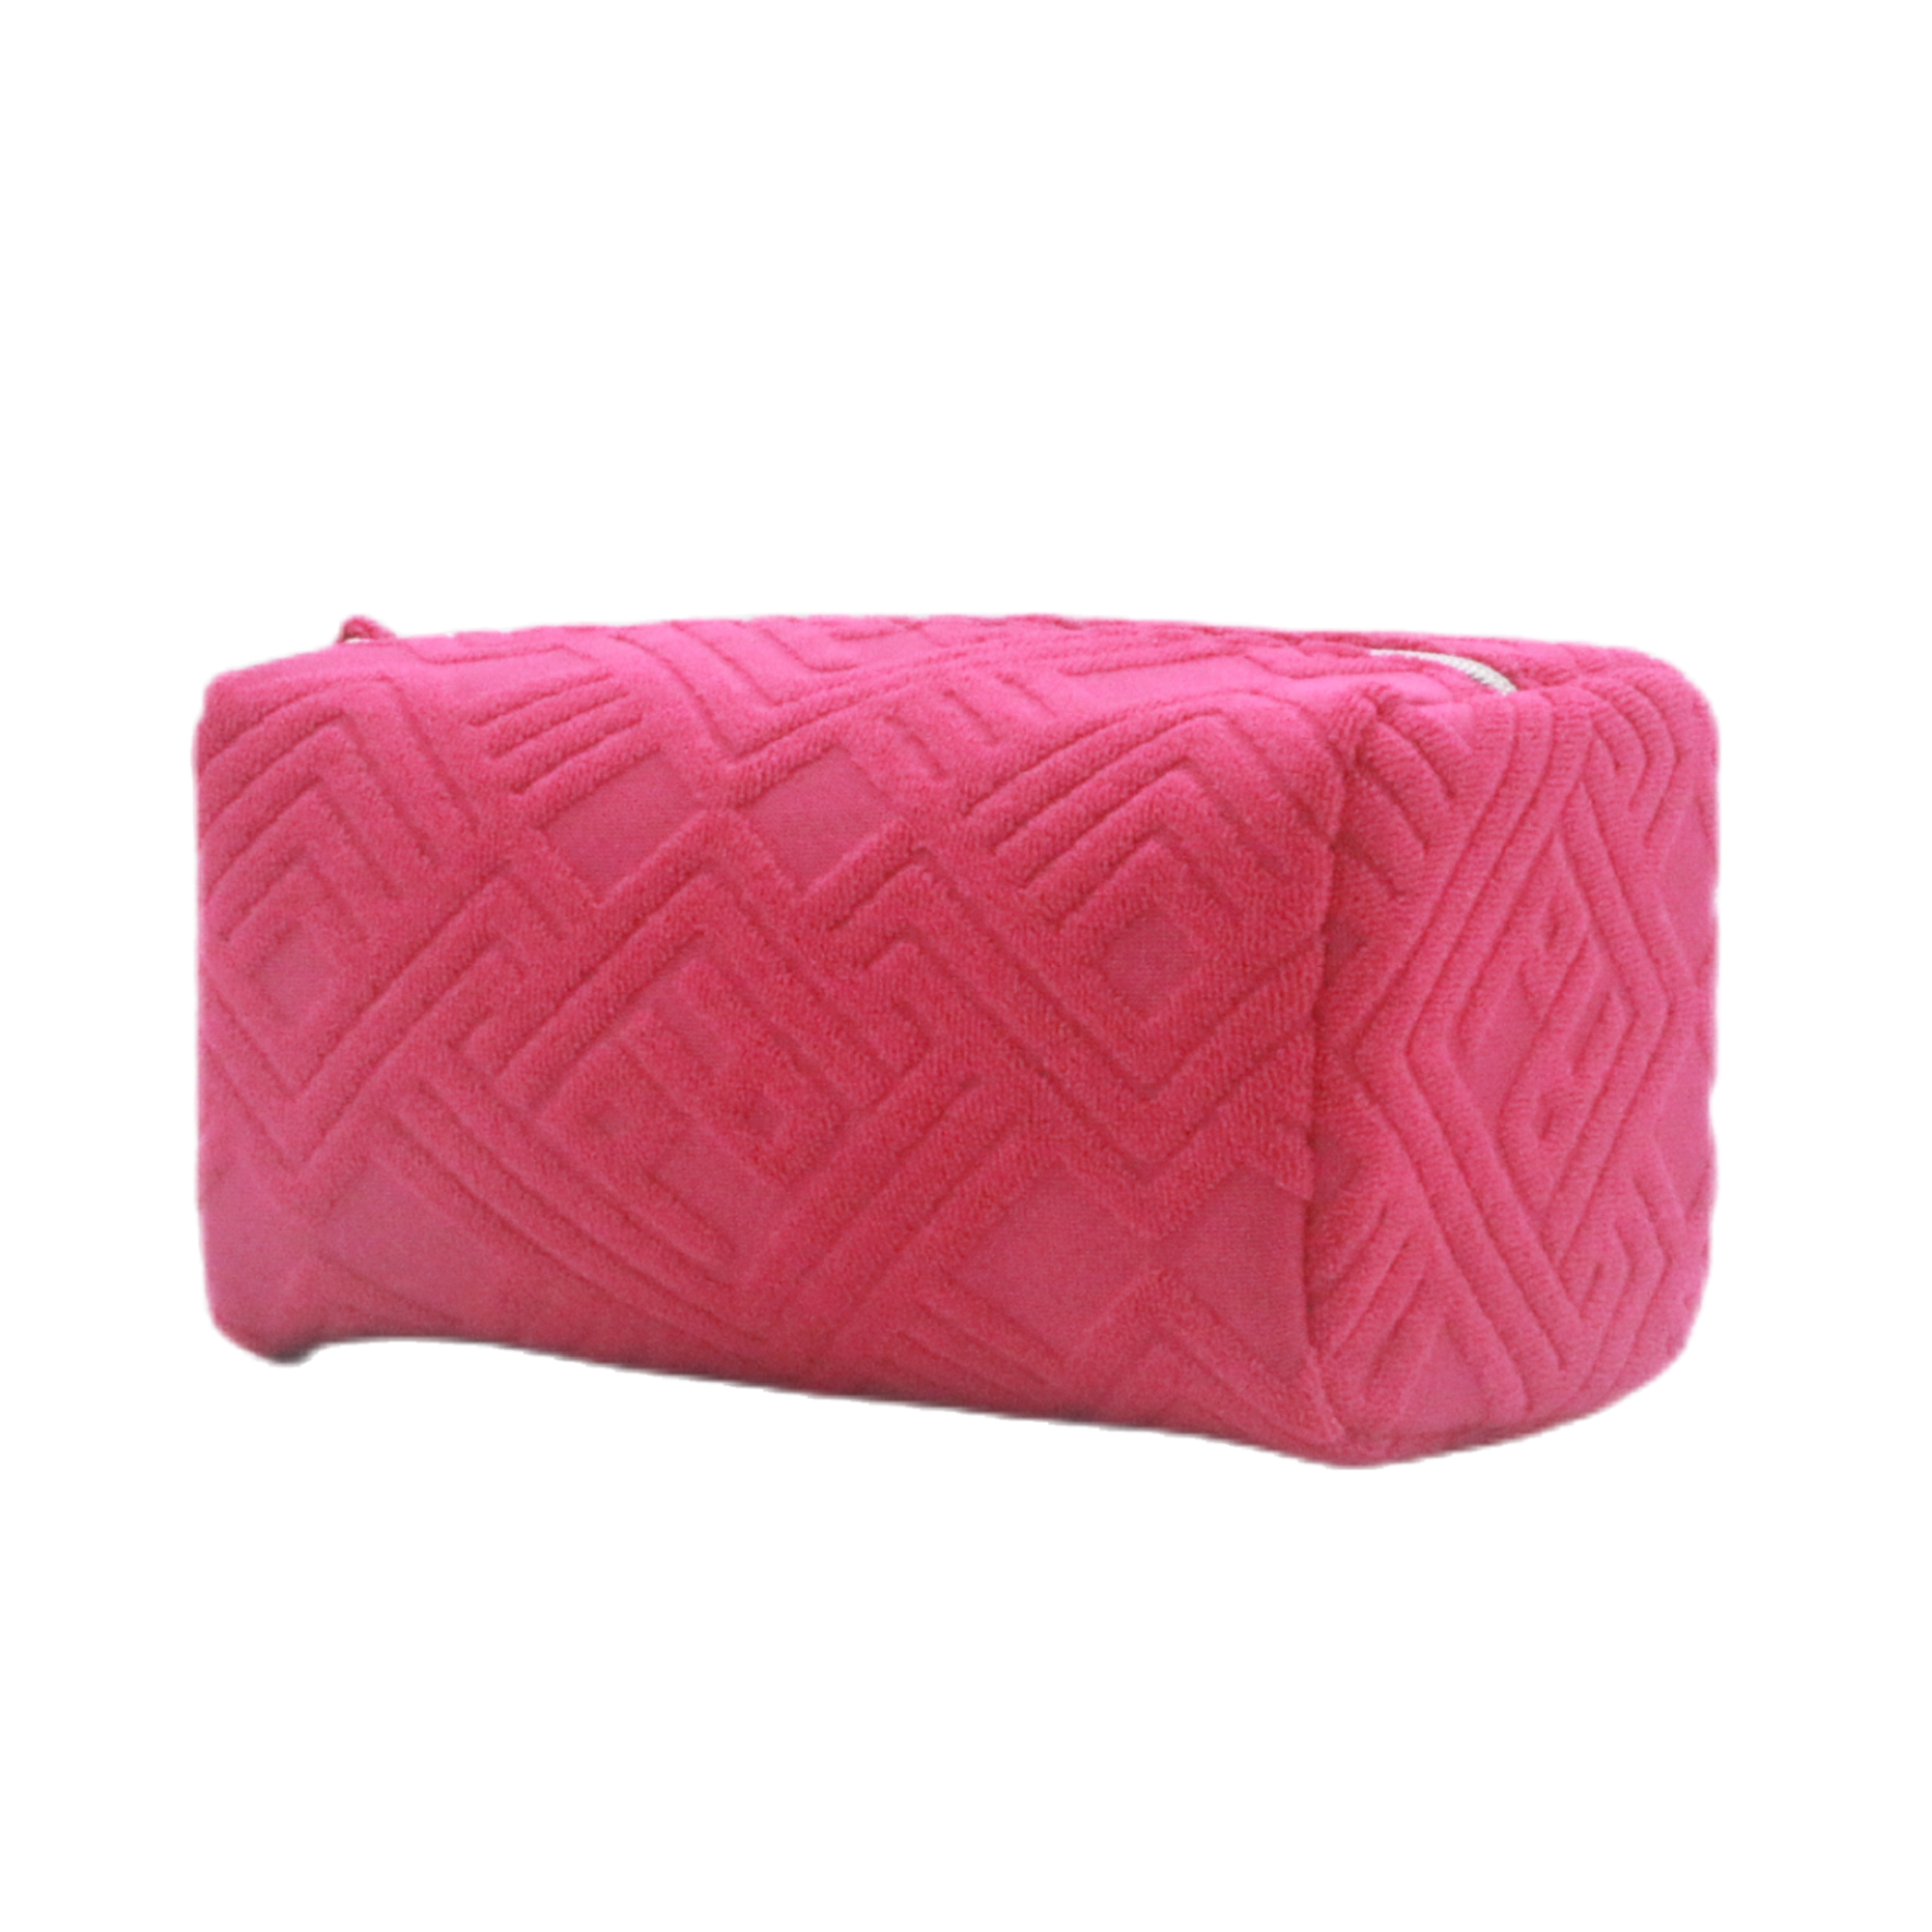 2023 Wholesale Custom Made Autumn Winter Lady Women Fashion Red Terry Cheap Towel Fabric Polyester Cosmetic Makeup Pouch Bag